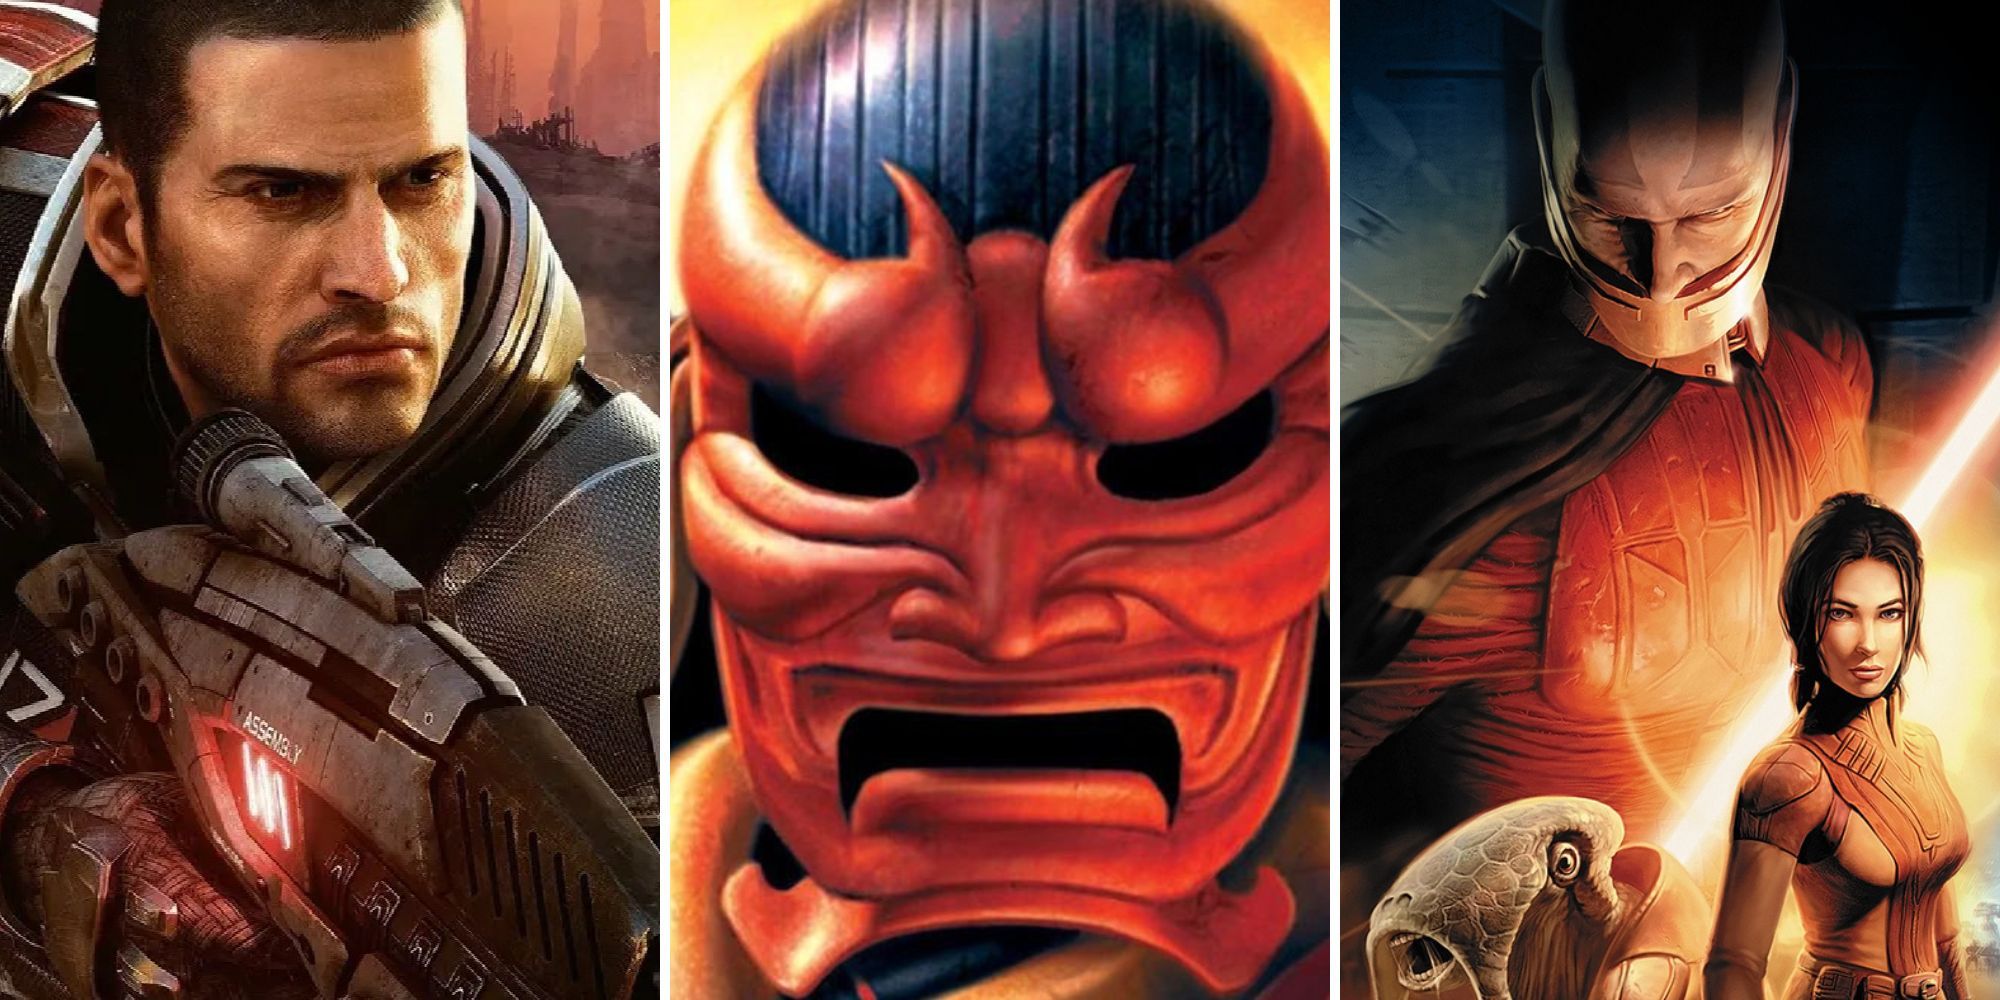 A grid of images showing the Bioware games Mass Effect 2, Jade Empire, and Star Wars: Knights of the Old Republic